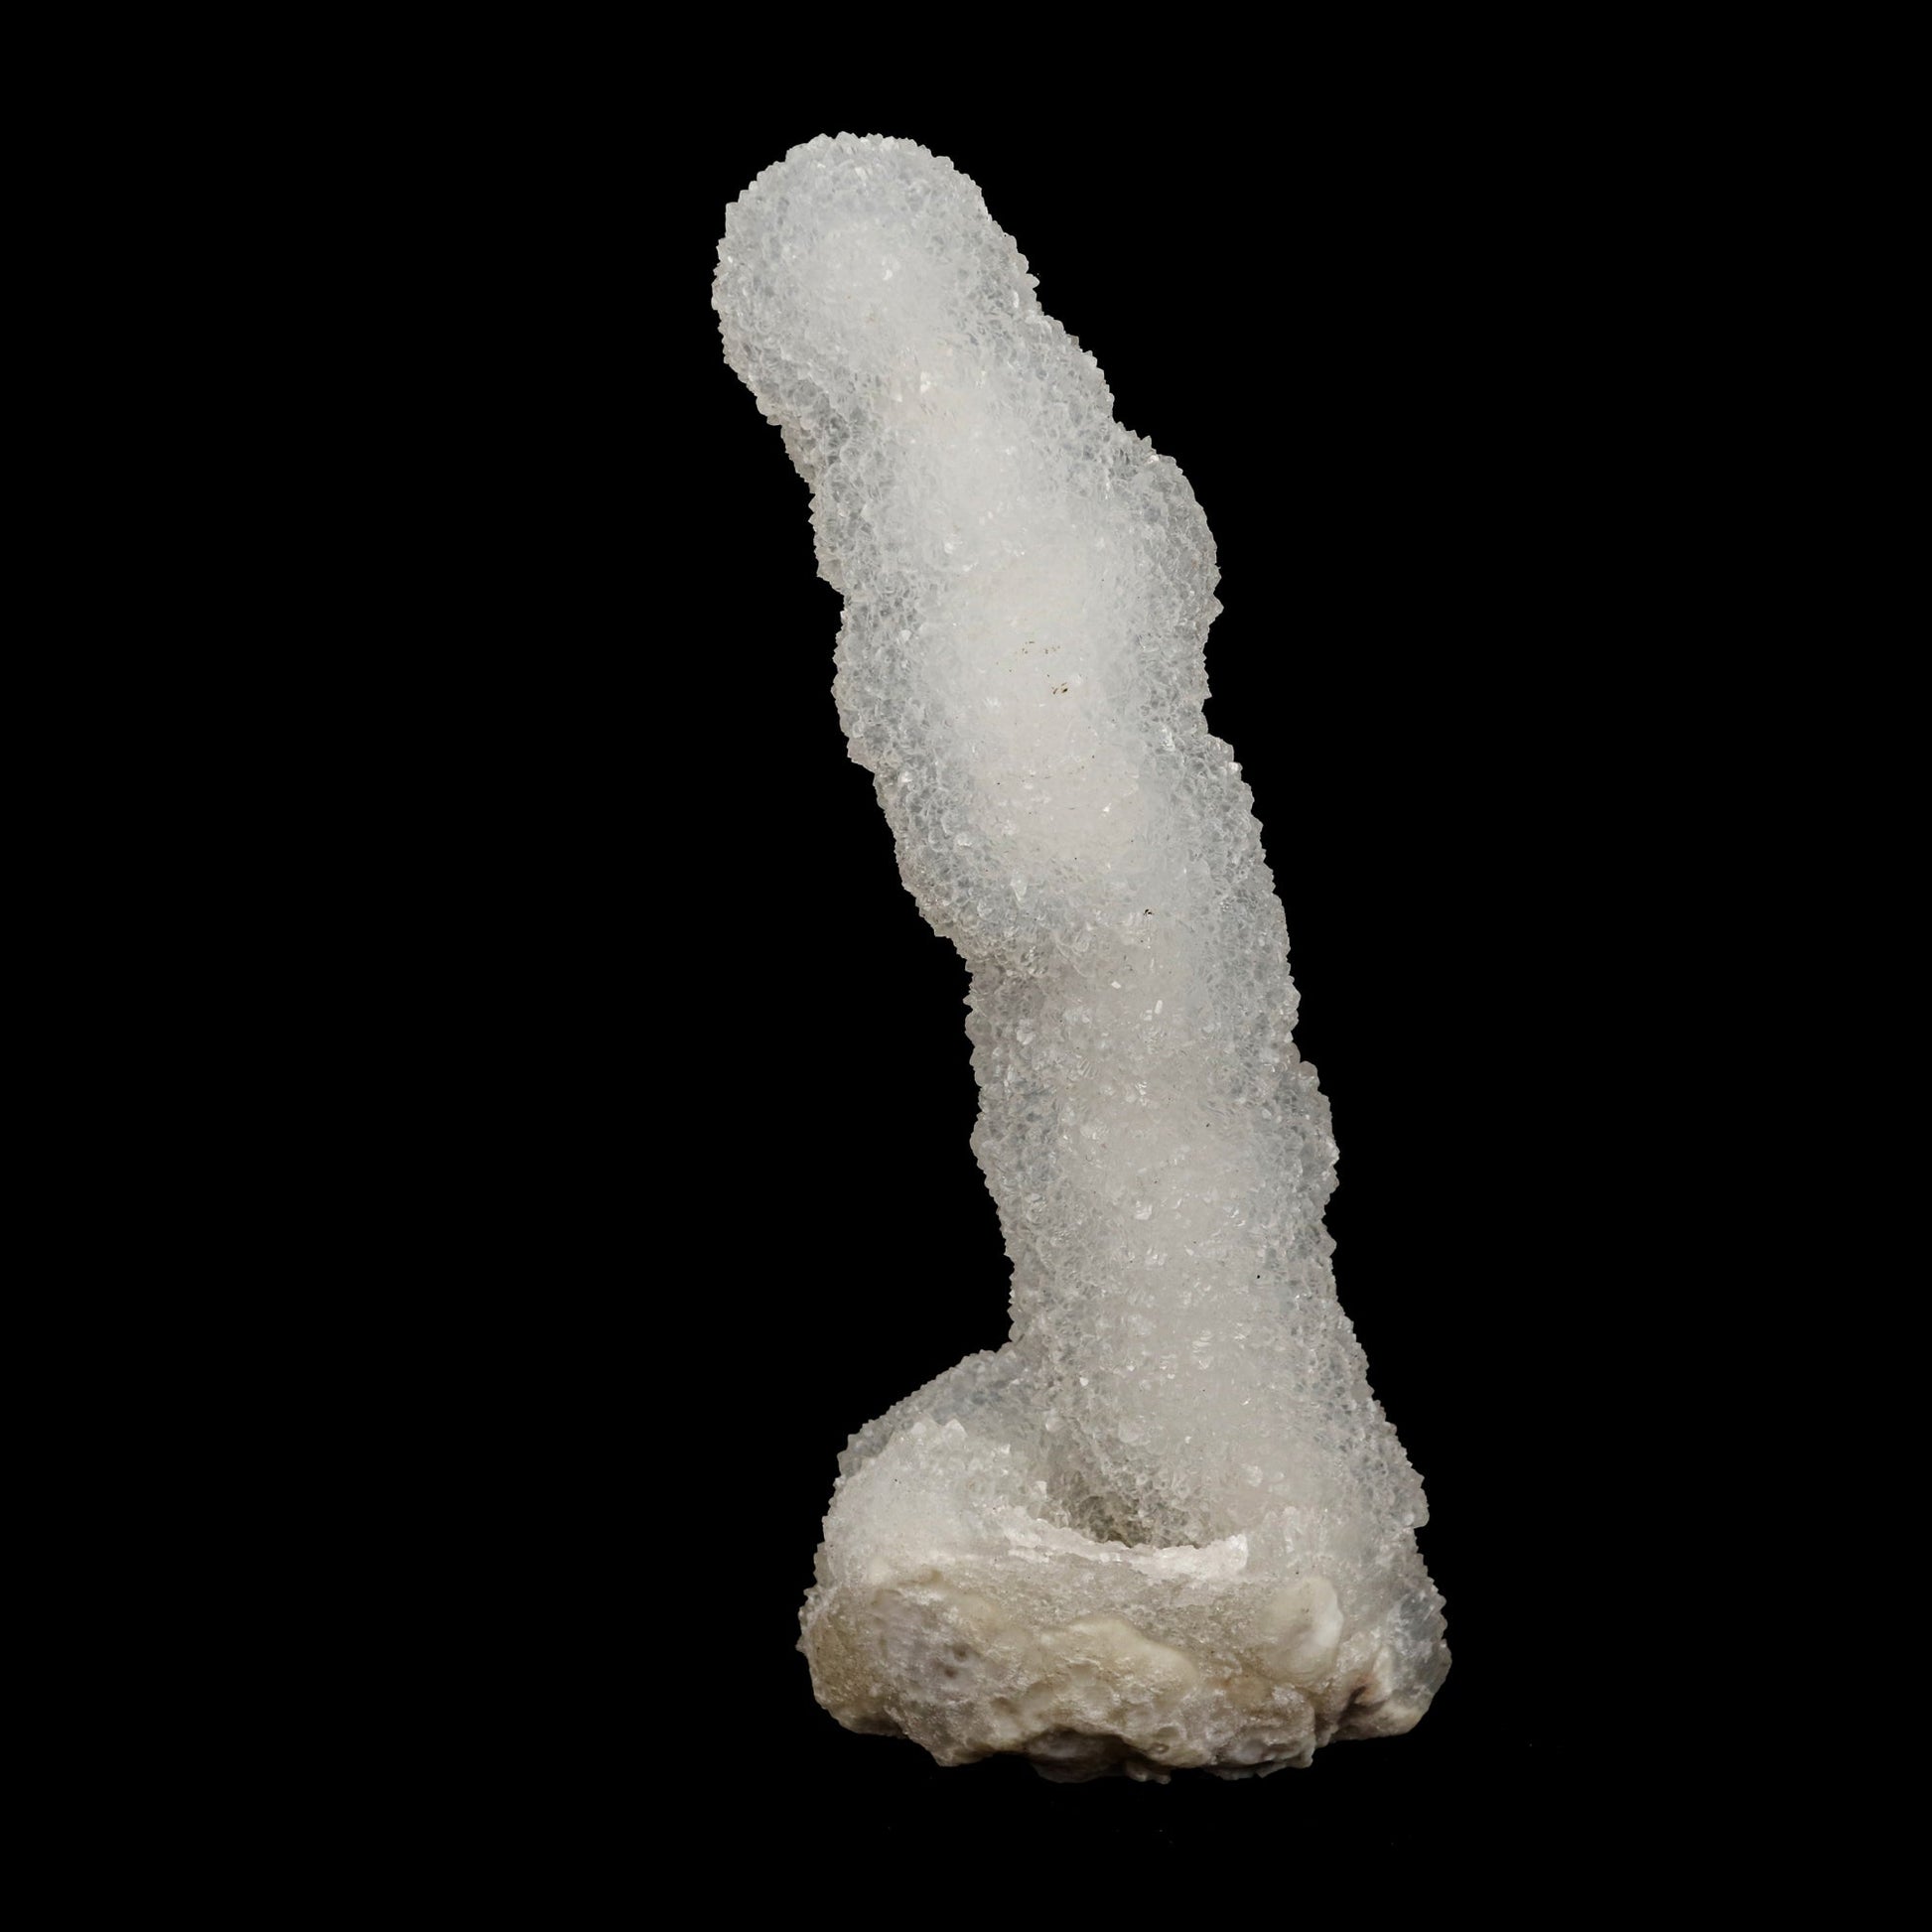 MM Quartz Stalactite Natural Mineral Specimen # B 5246  https://www.superbminerals.us/products/mm-quartz-stalactite-natural-mineral-specimen-b-5246  Features: It is encrusted for splendid white, microcrystalline Quartz crystals inside a glossy, glossy coating of Apophyllite crystals. Those lustre, colour, What's more Precious stone arrangement would every one great. To great condition, it is a amazing and magnetic example. Primary Mineral(s): MM QuartzSecondary